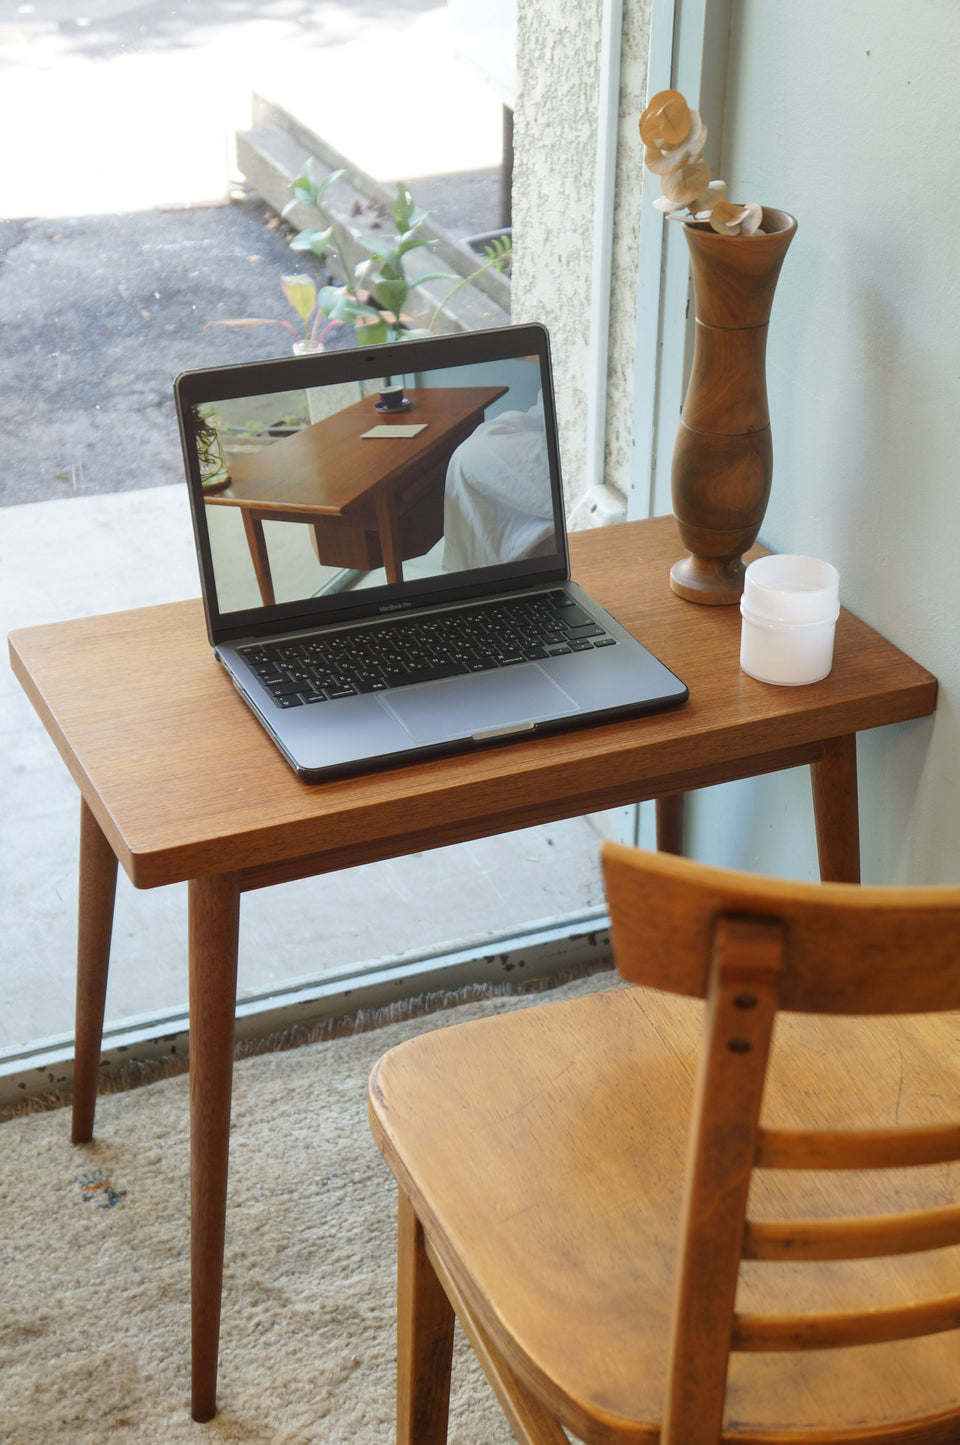 Japanese Vintage Teakwood Side Table/ジャパンヴィンテージ サイドテーブル チーク材